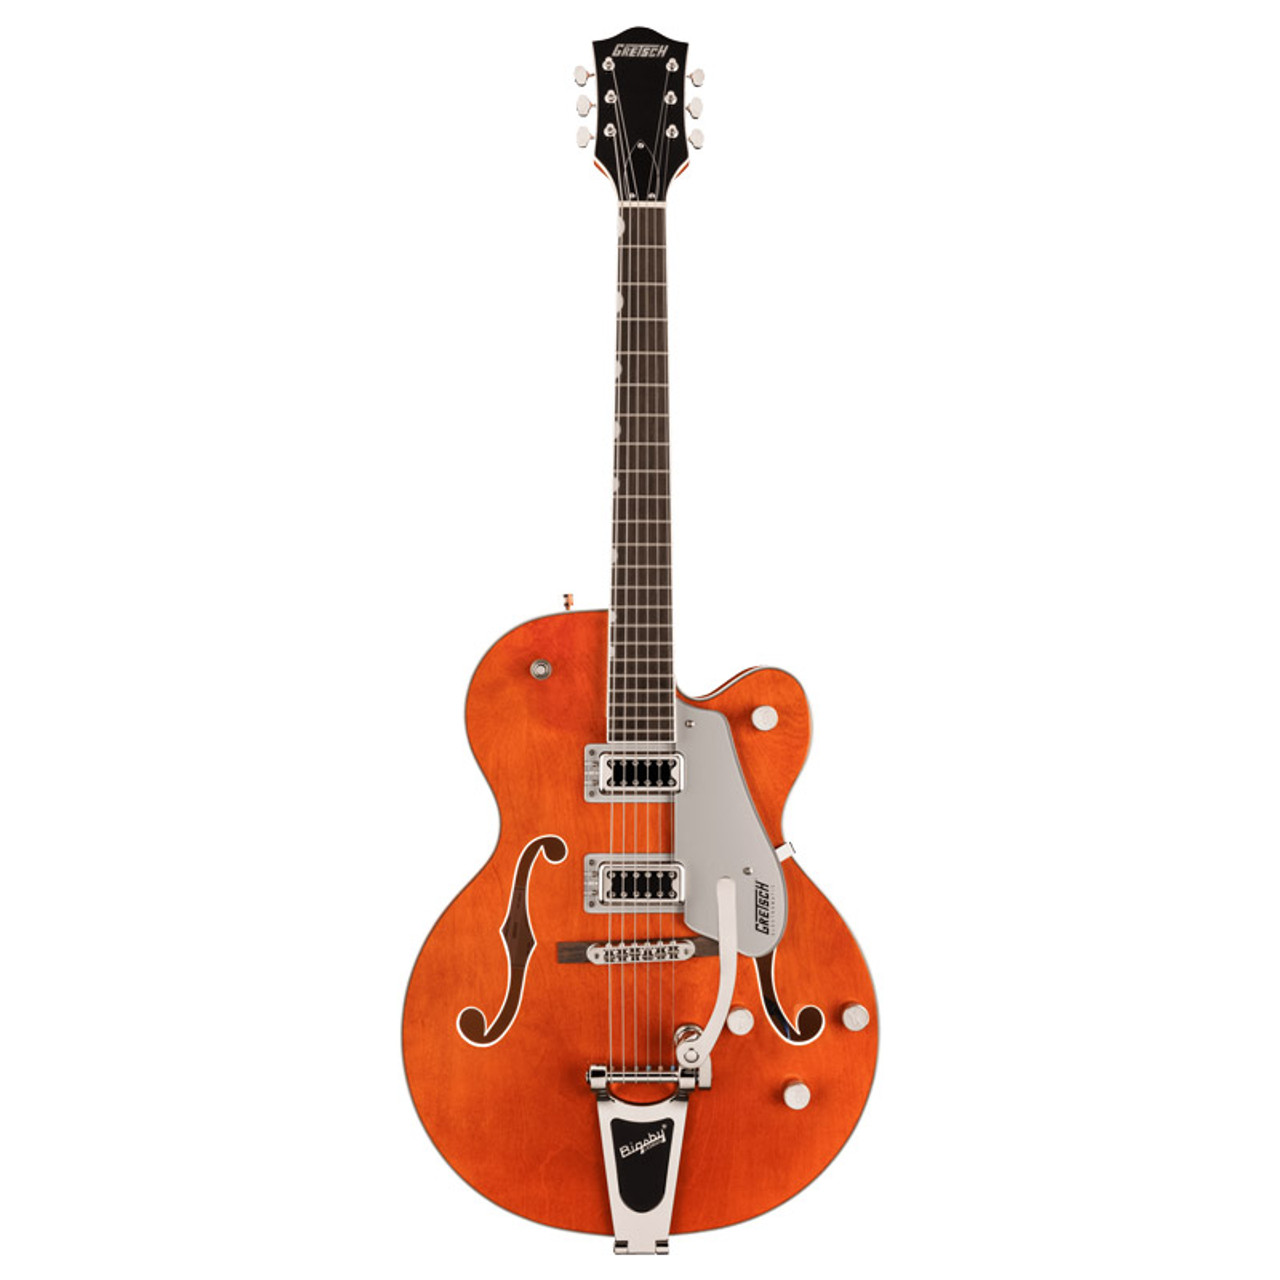 Electric　Electromatic　Guitar　with　Orange　Absolute　Classic　Single-Cut　Music　Bigsby,　Stain　Gretsch　G5420T